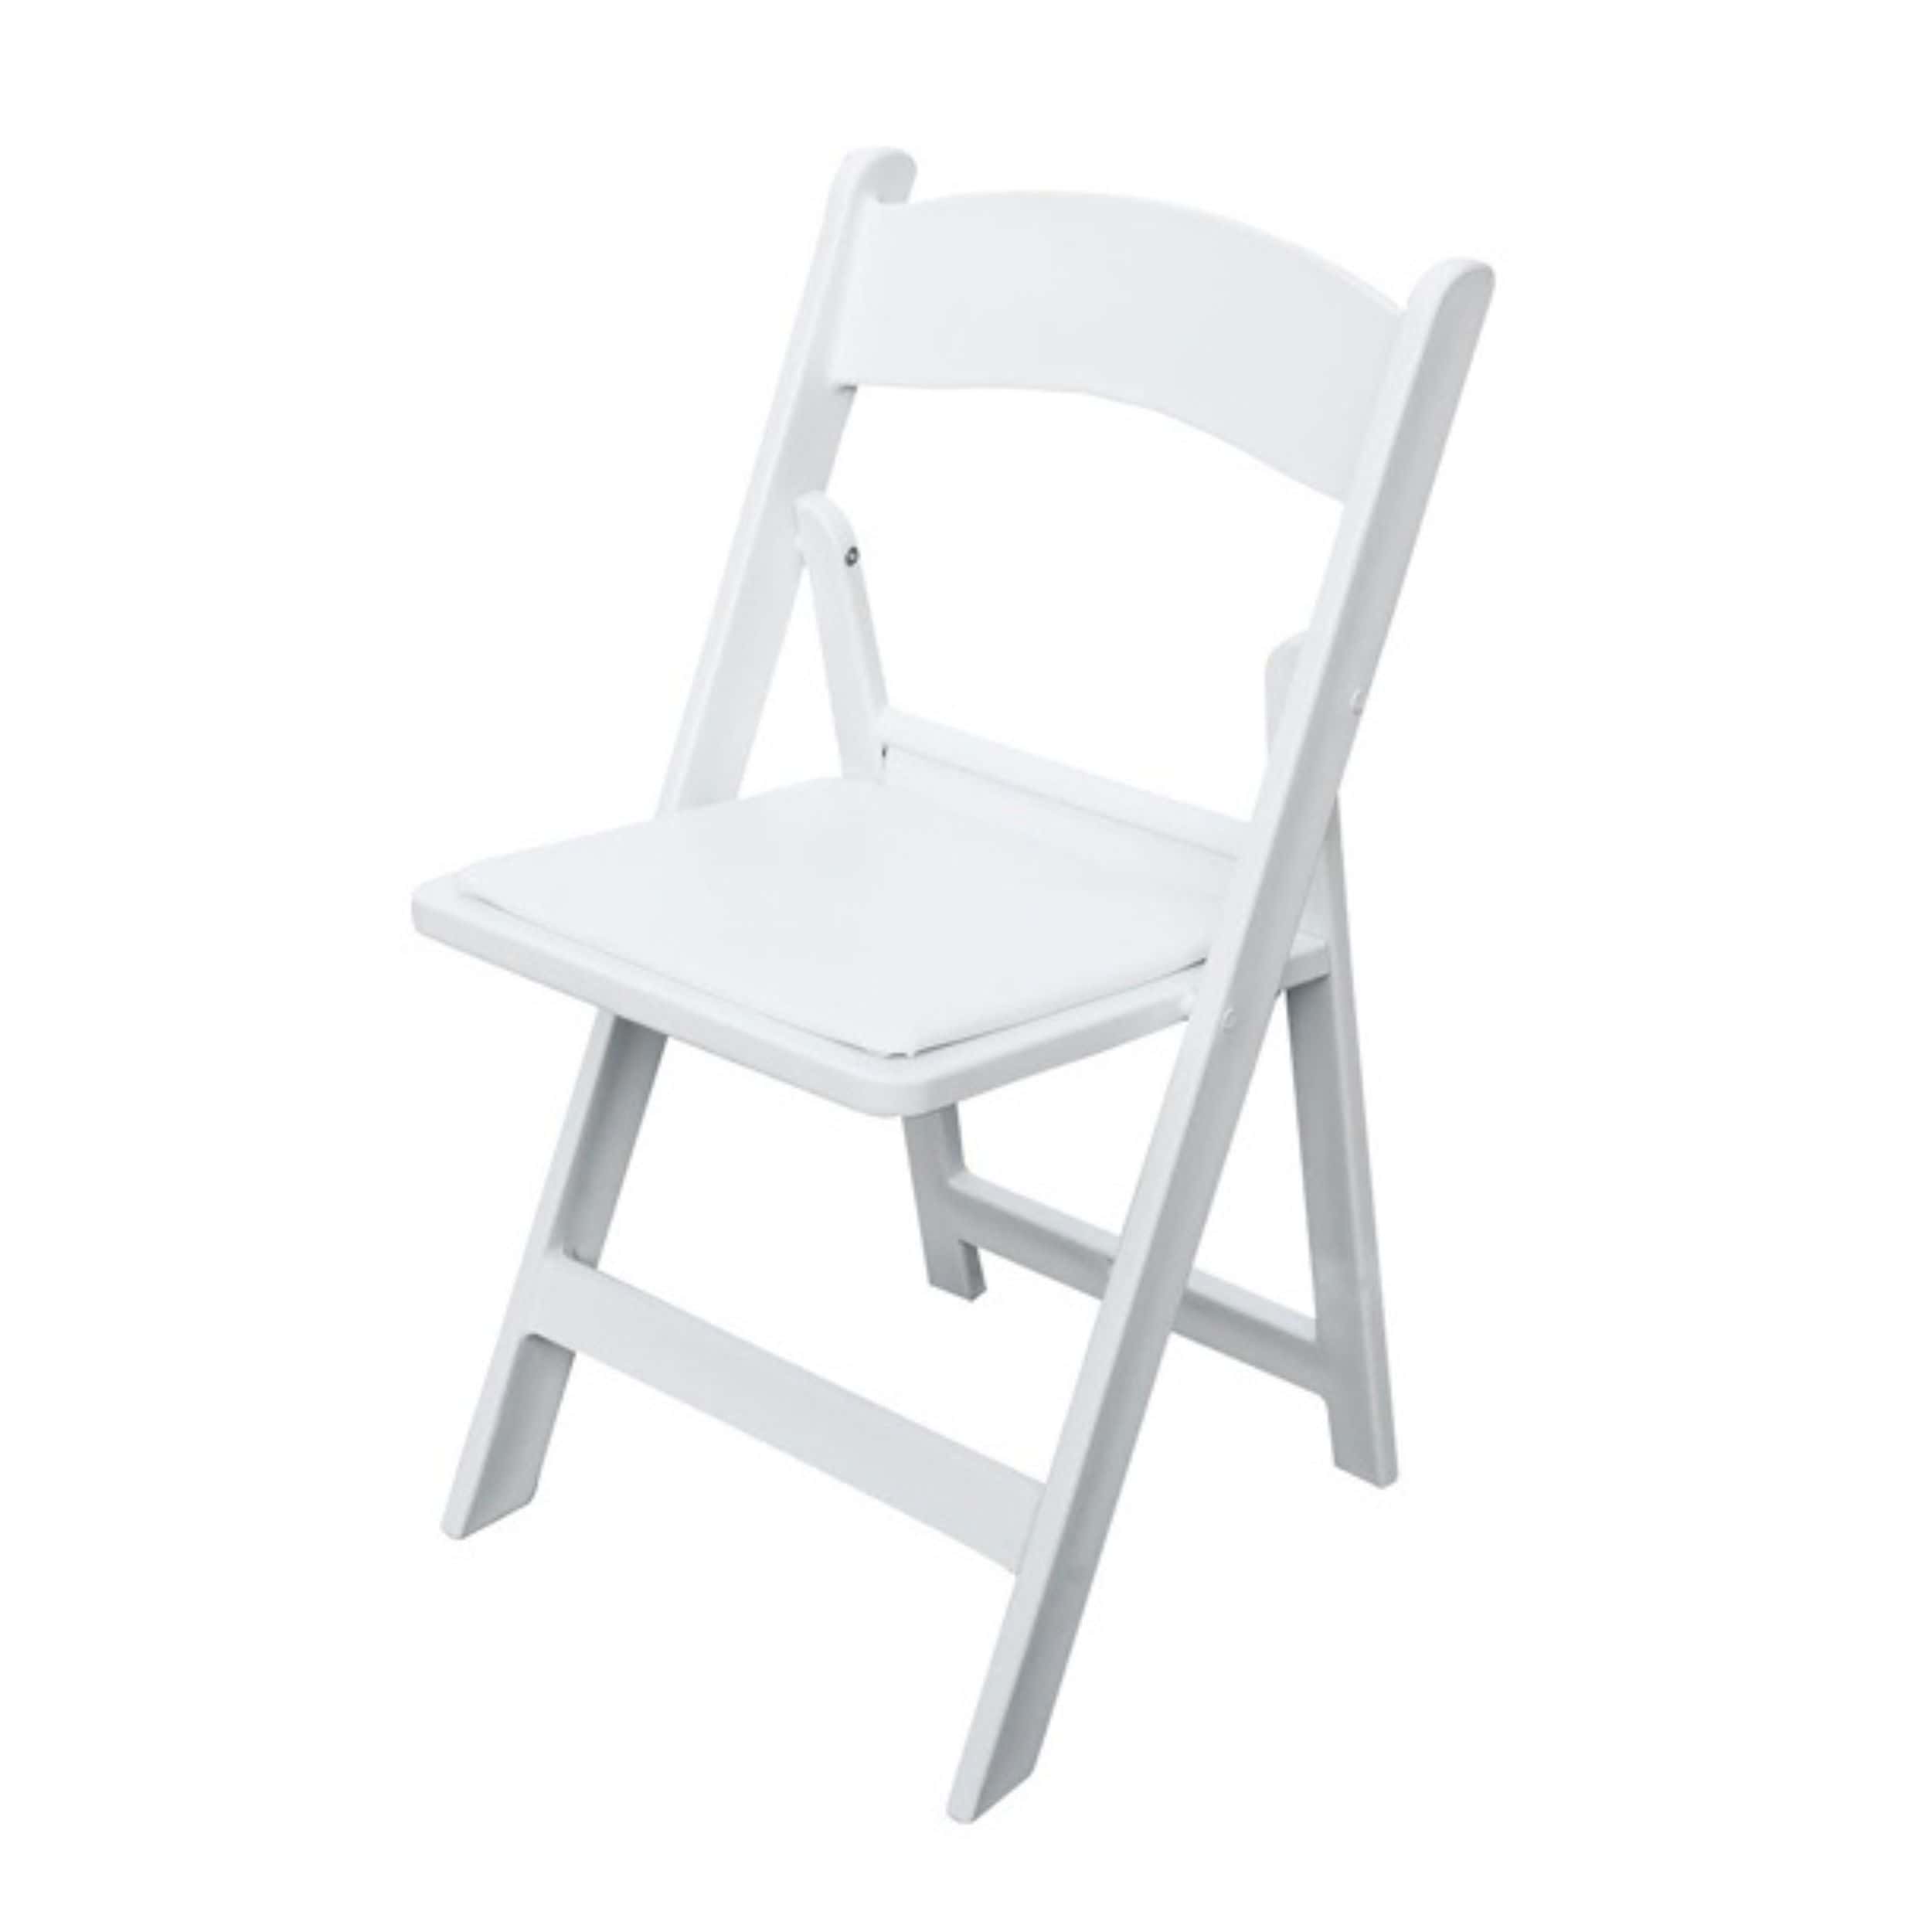 Hobart Events | White Padded Folding Chair Hire